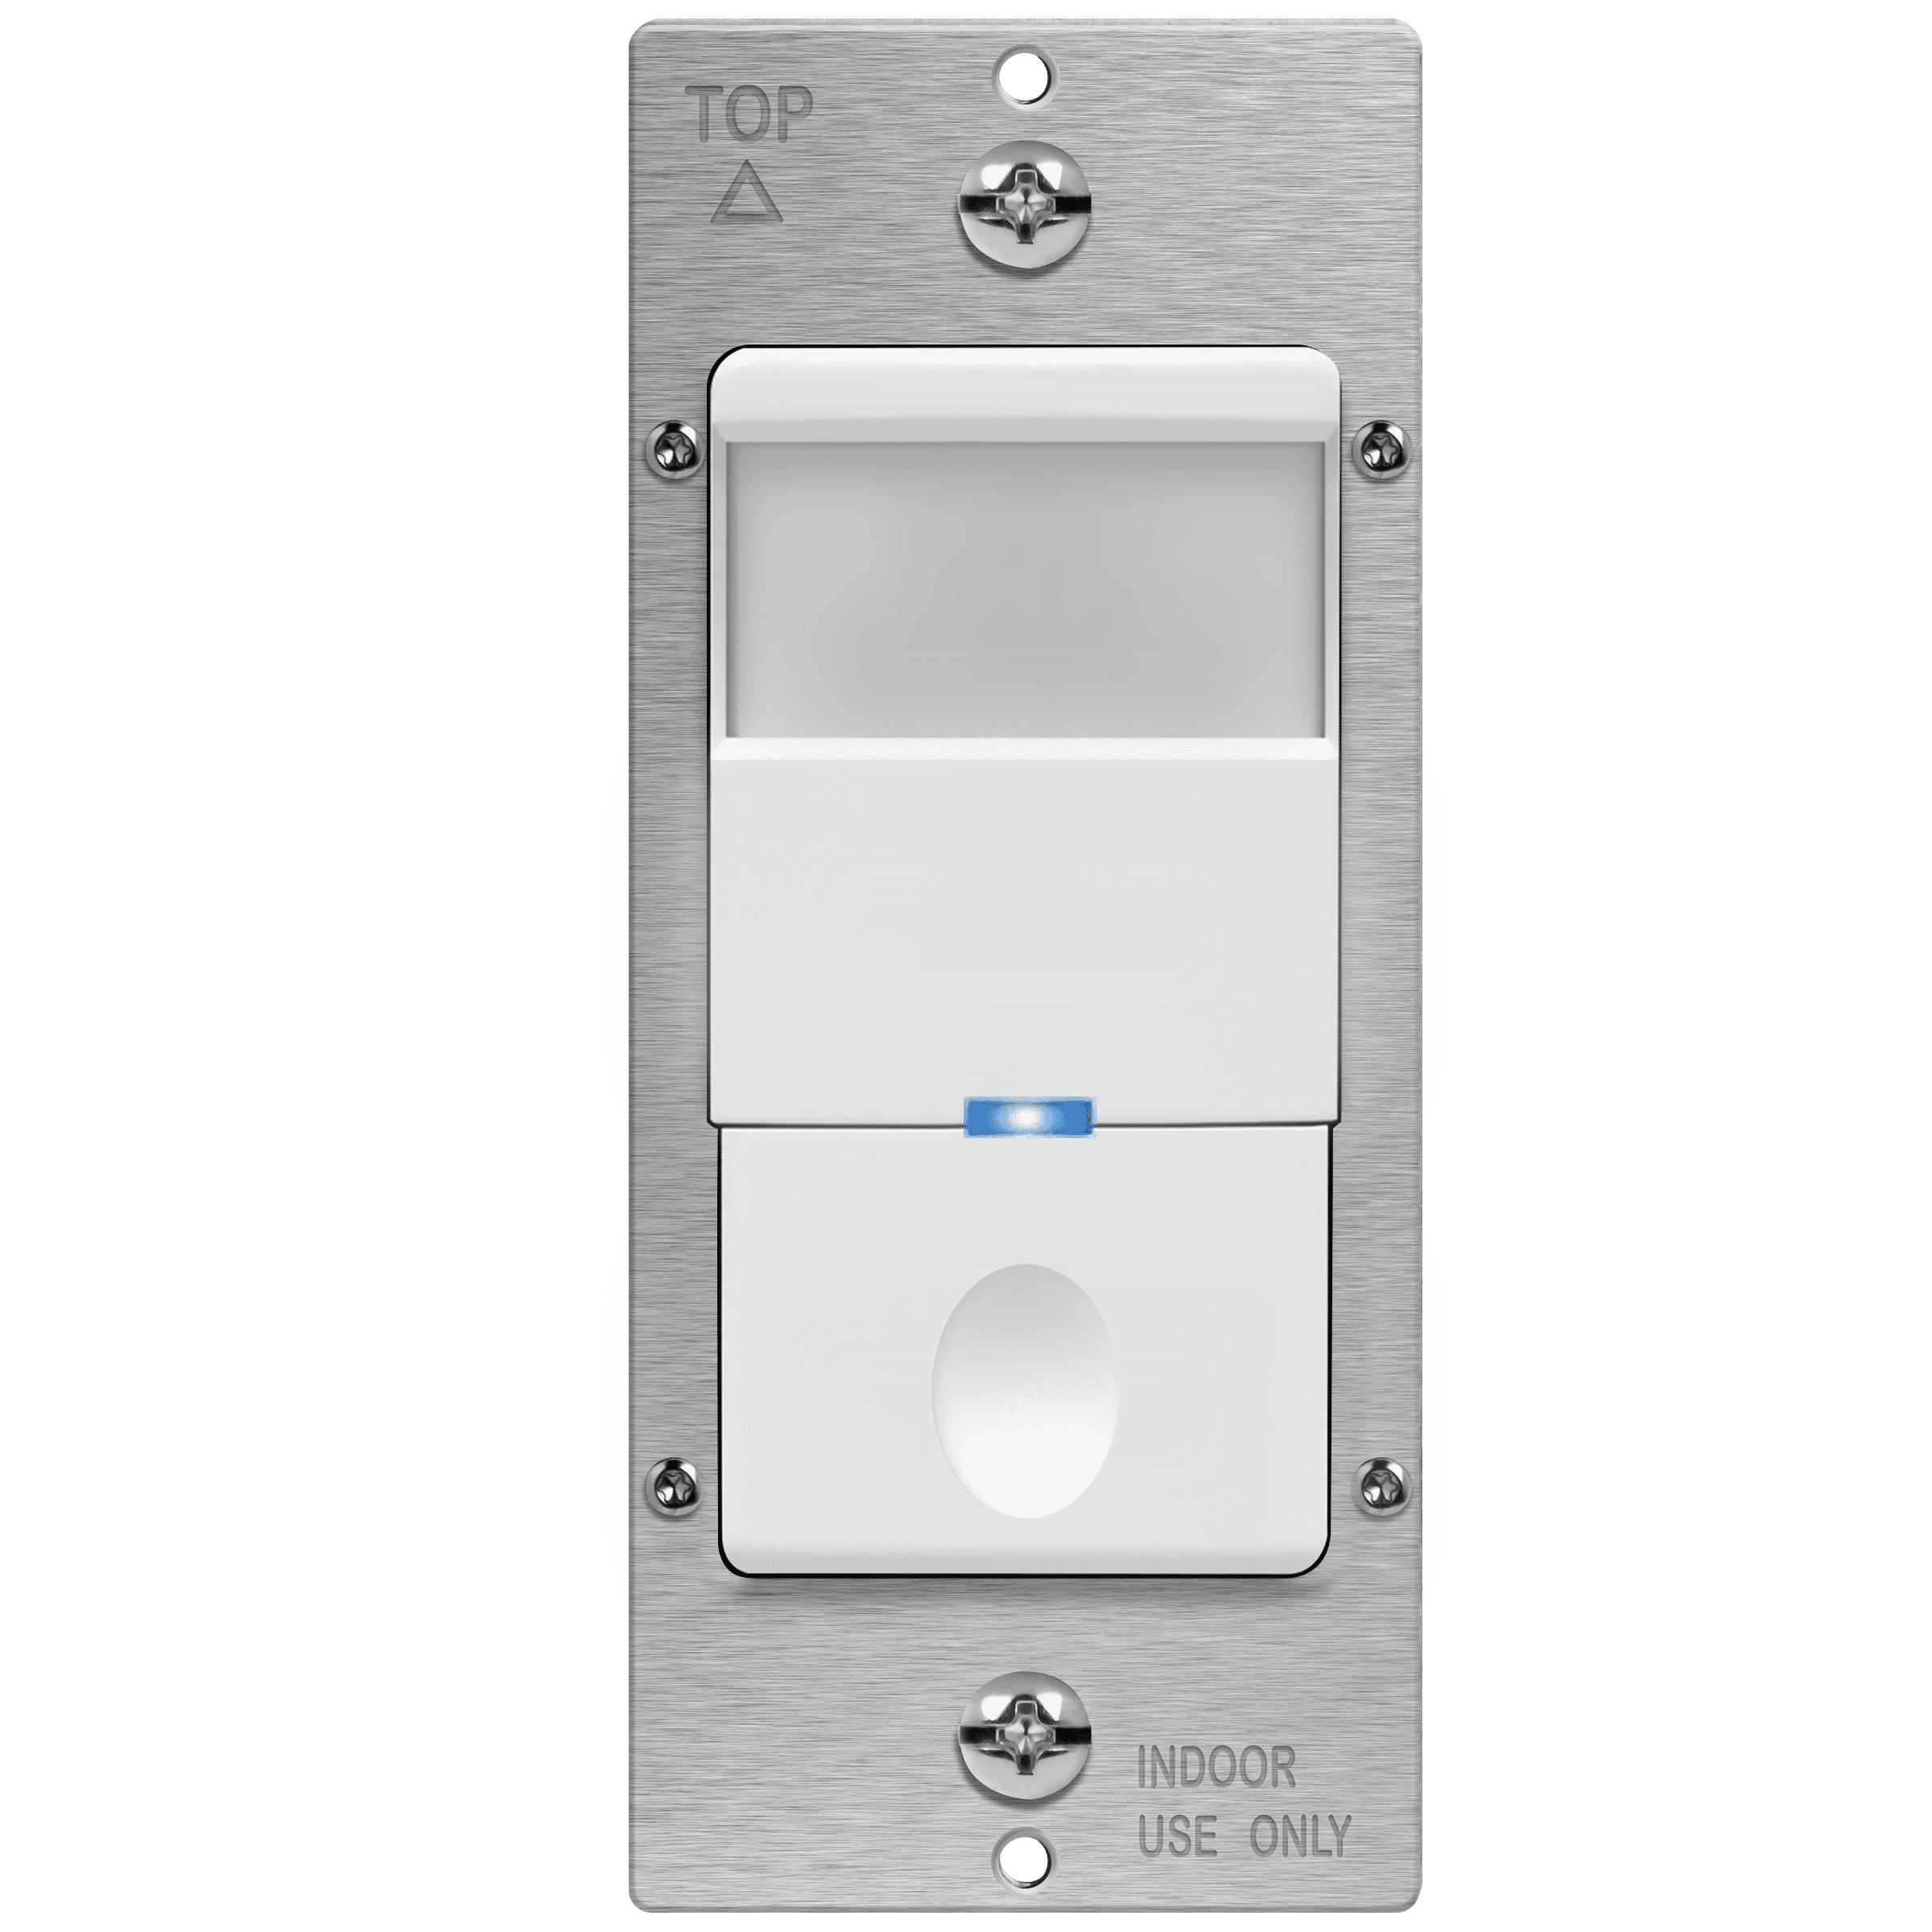 TOPGREENER Motion Sensor Light Switch, in-Wall Occupancy Detector, No  Neutral Required, 4A 500W 1/8HP, 120-277VAC, Ground Wire Required, Single  Pole, UL Listed, TDOS5-J-W, White - Walmart.com  Walmart.com